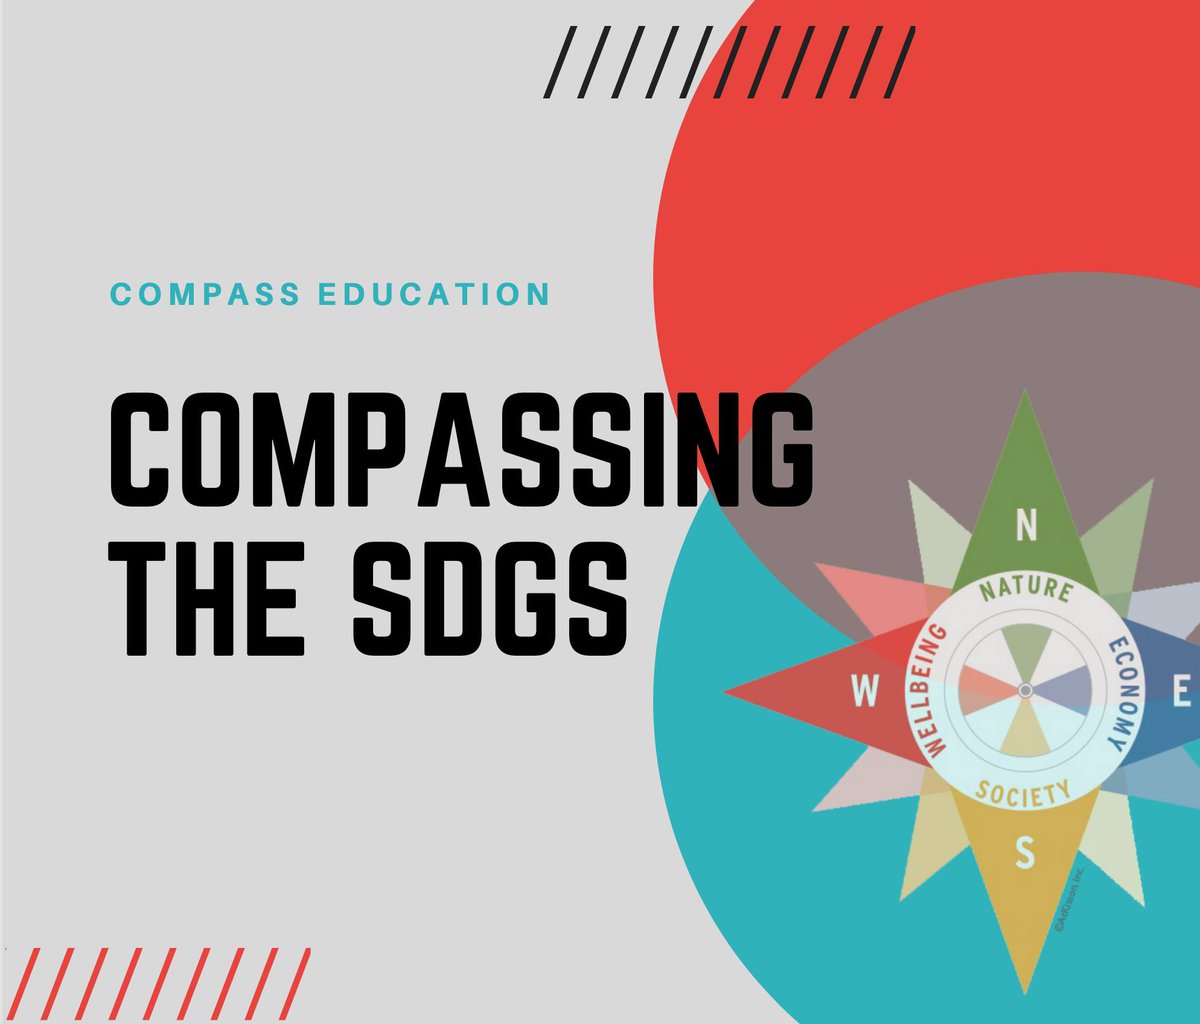 The 4 Sustainability Compass points provide a simple, clear, integrated, and comprehensive structure for sustainability learning. Use our free resources to learn more and begin to engage with the SDGs today! ow.ly/PmX550KPwhs #SDGs #sustainabilityeducation #systemchange